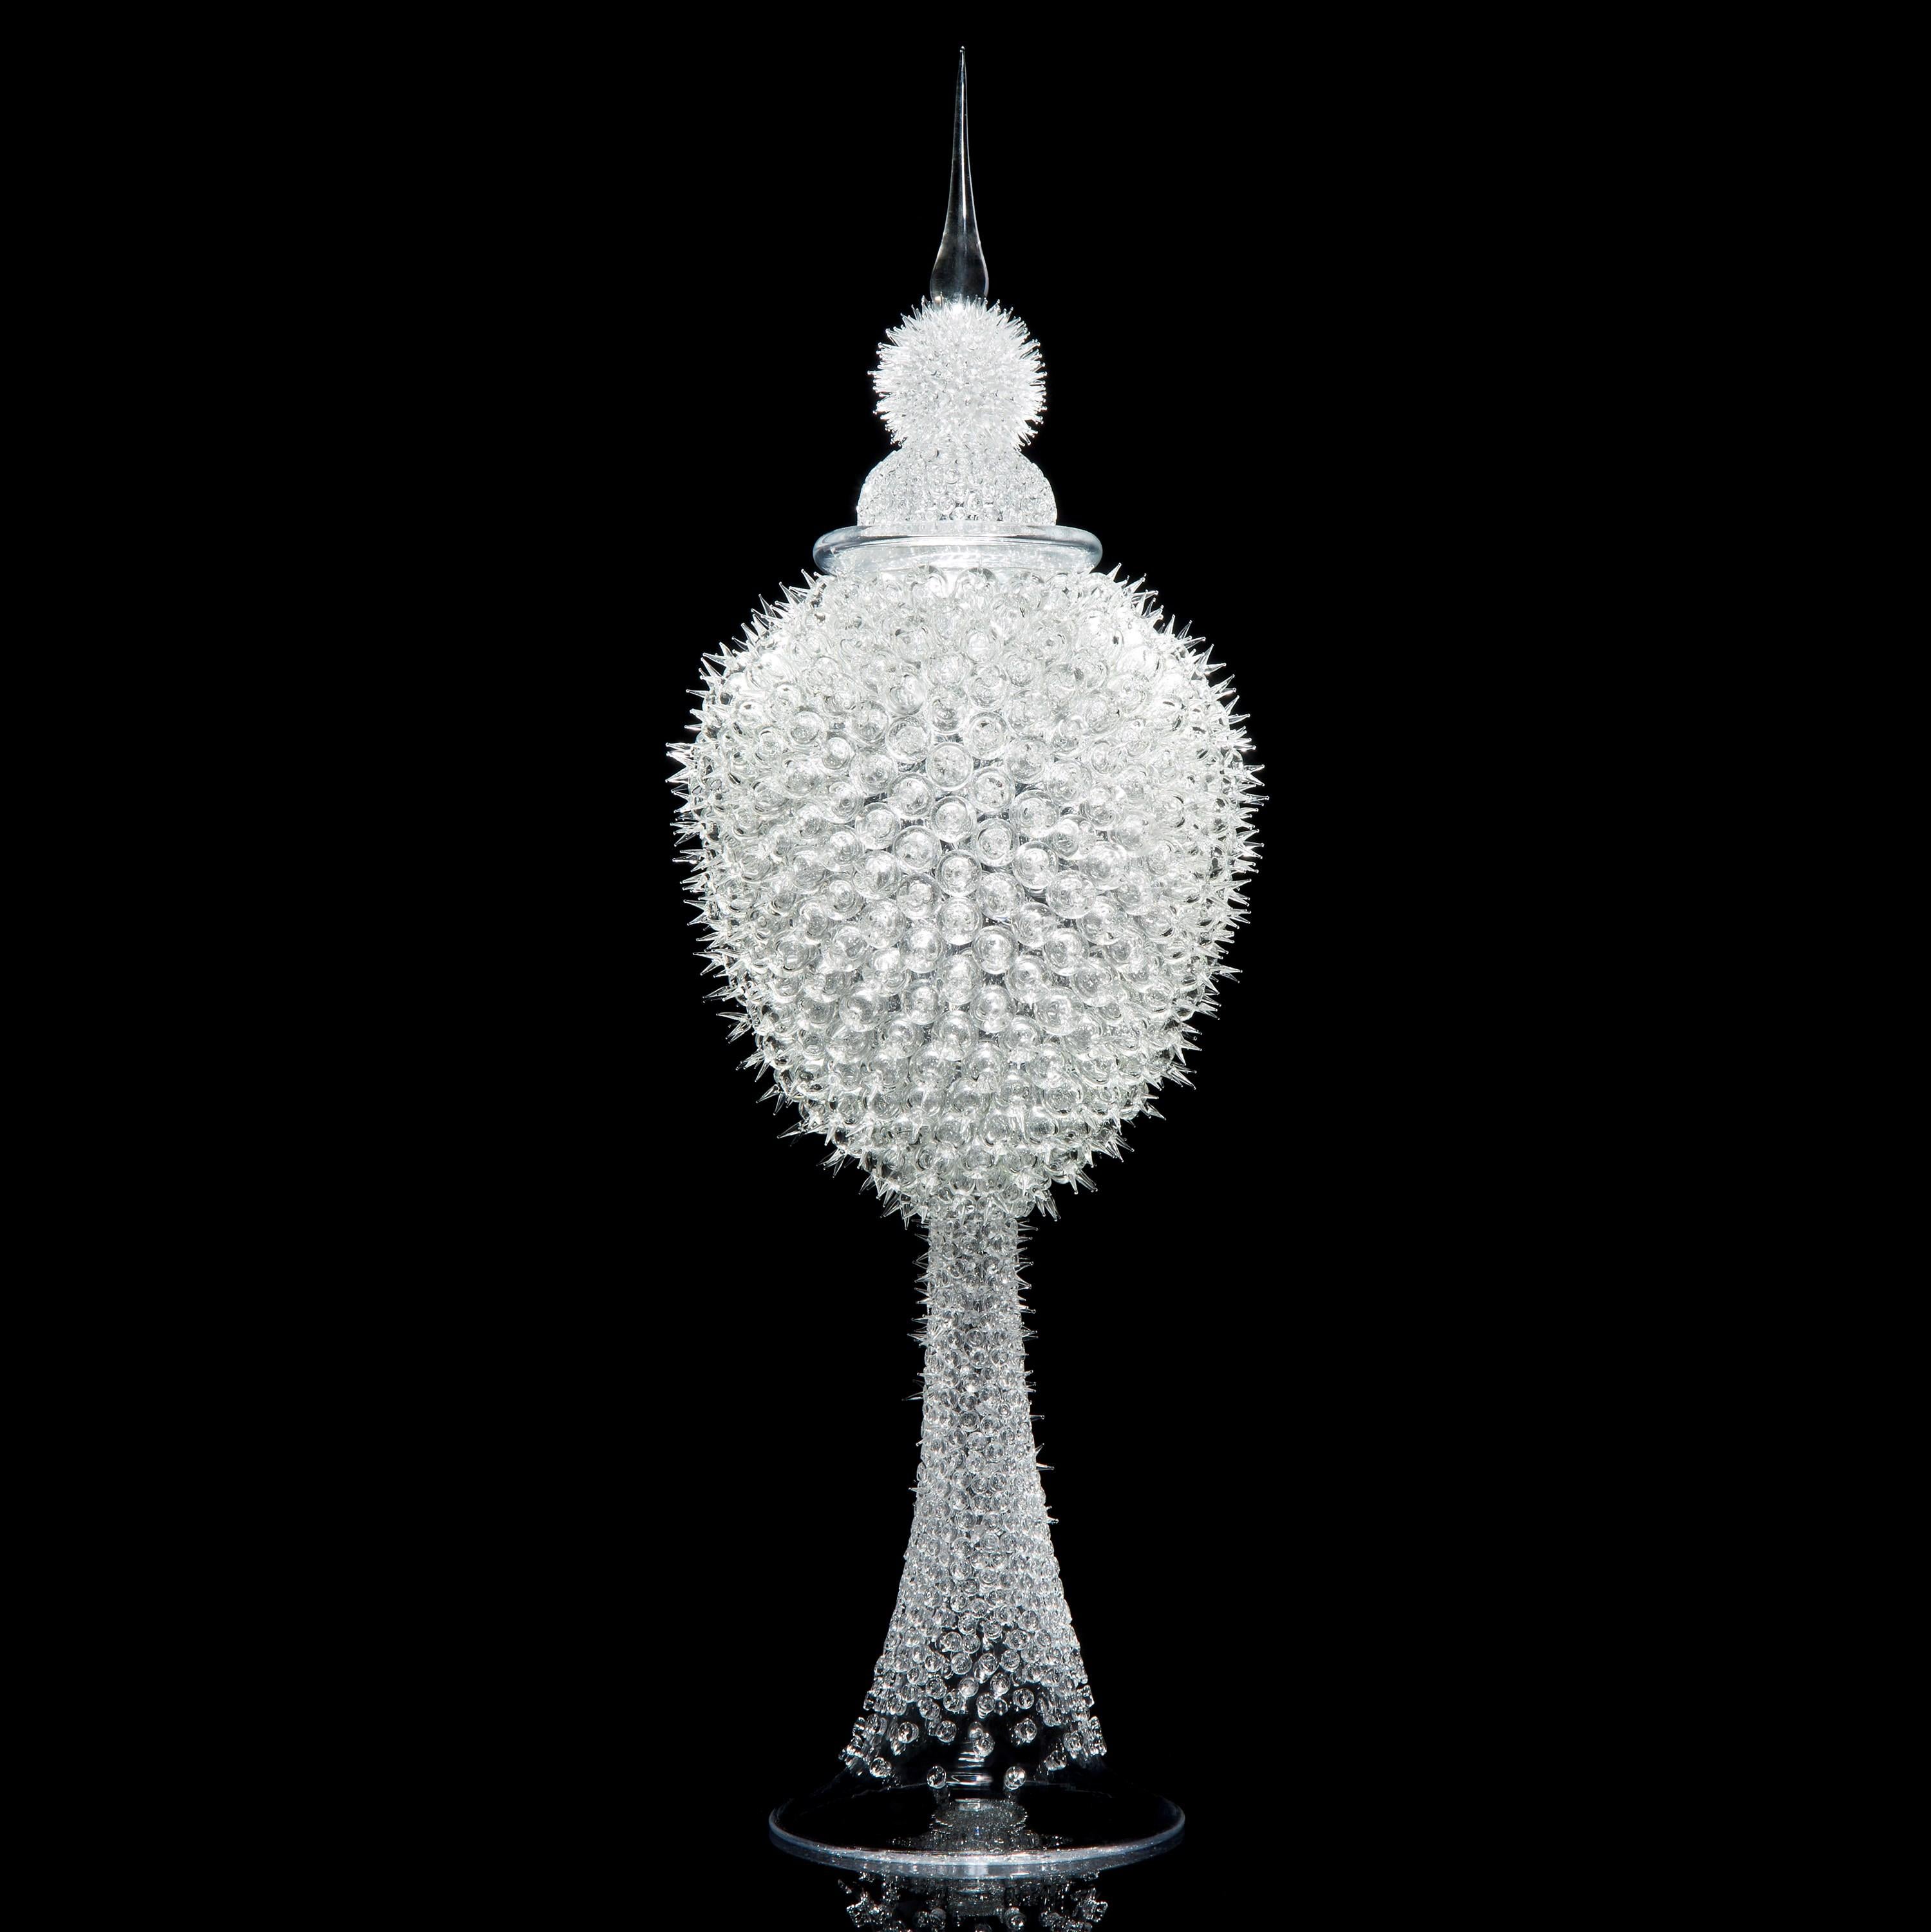 'Acanthus Jar' is a unique clear glass sculptural jar by British glass artist James Lethbridge. Blown glass with the outer layer covered in flame worked decoration and adornment. With removable decorative glass stopper.

Initially following a